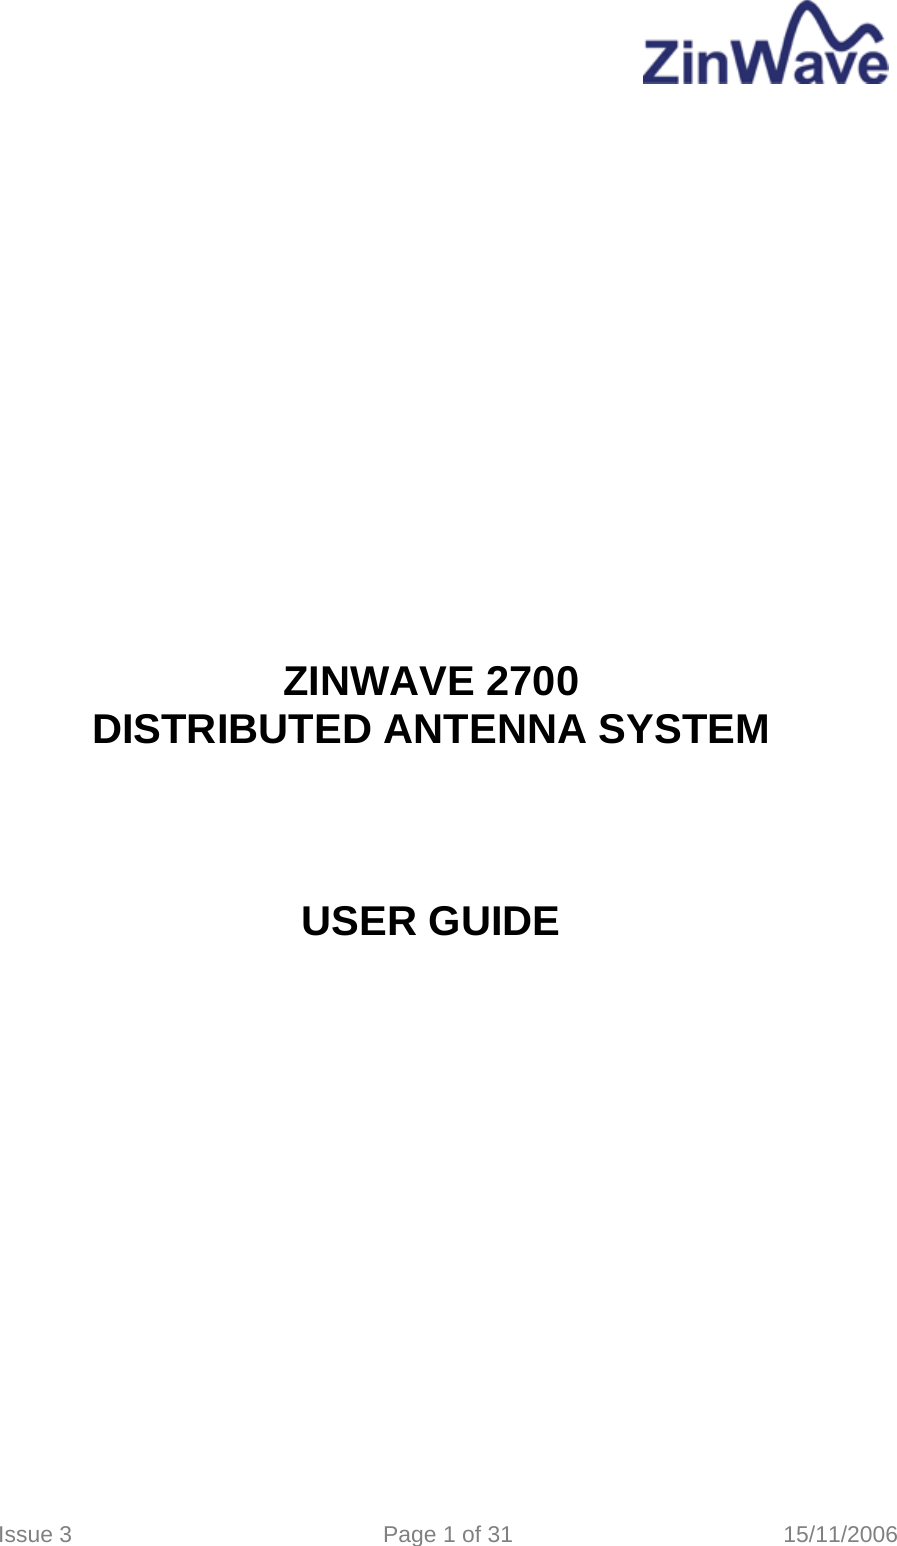                     ZINWAVE 2700 DISTRIBUTED ANTENNA SYSTEM     USER GUIDE  Issue 3  Page 1 of 31  15/11/2006   